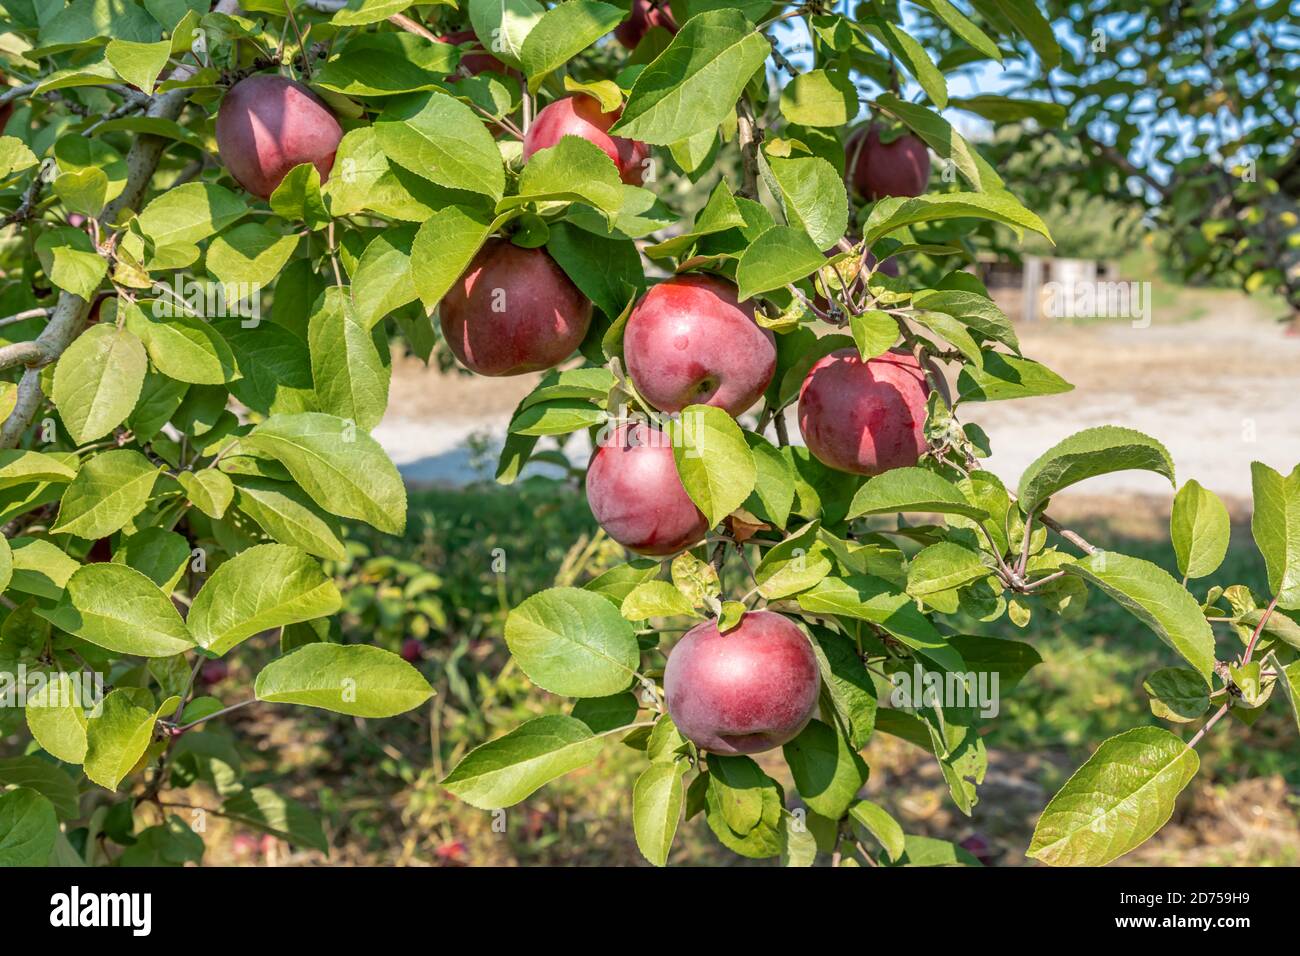 Detail image of red apples in an apple tree in Putney, Vermont Stock Photo